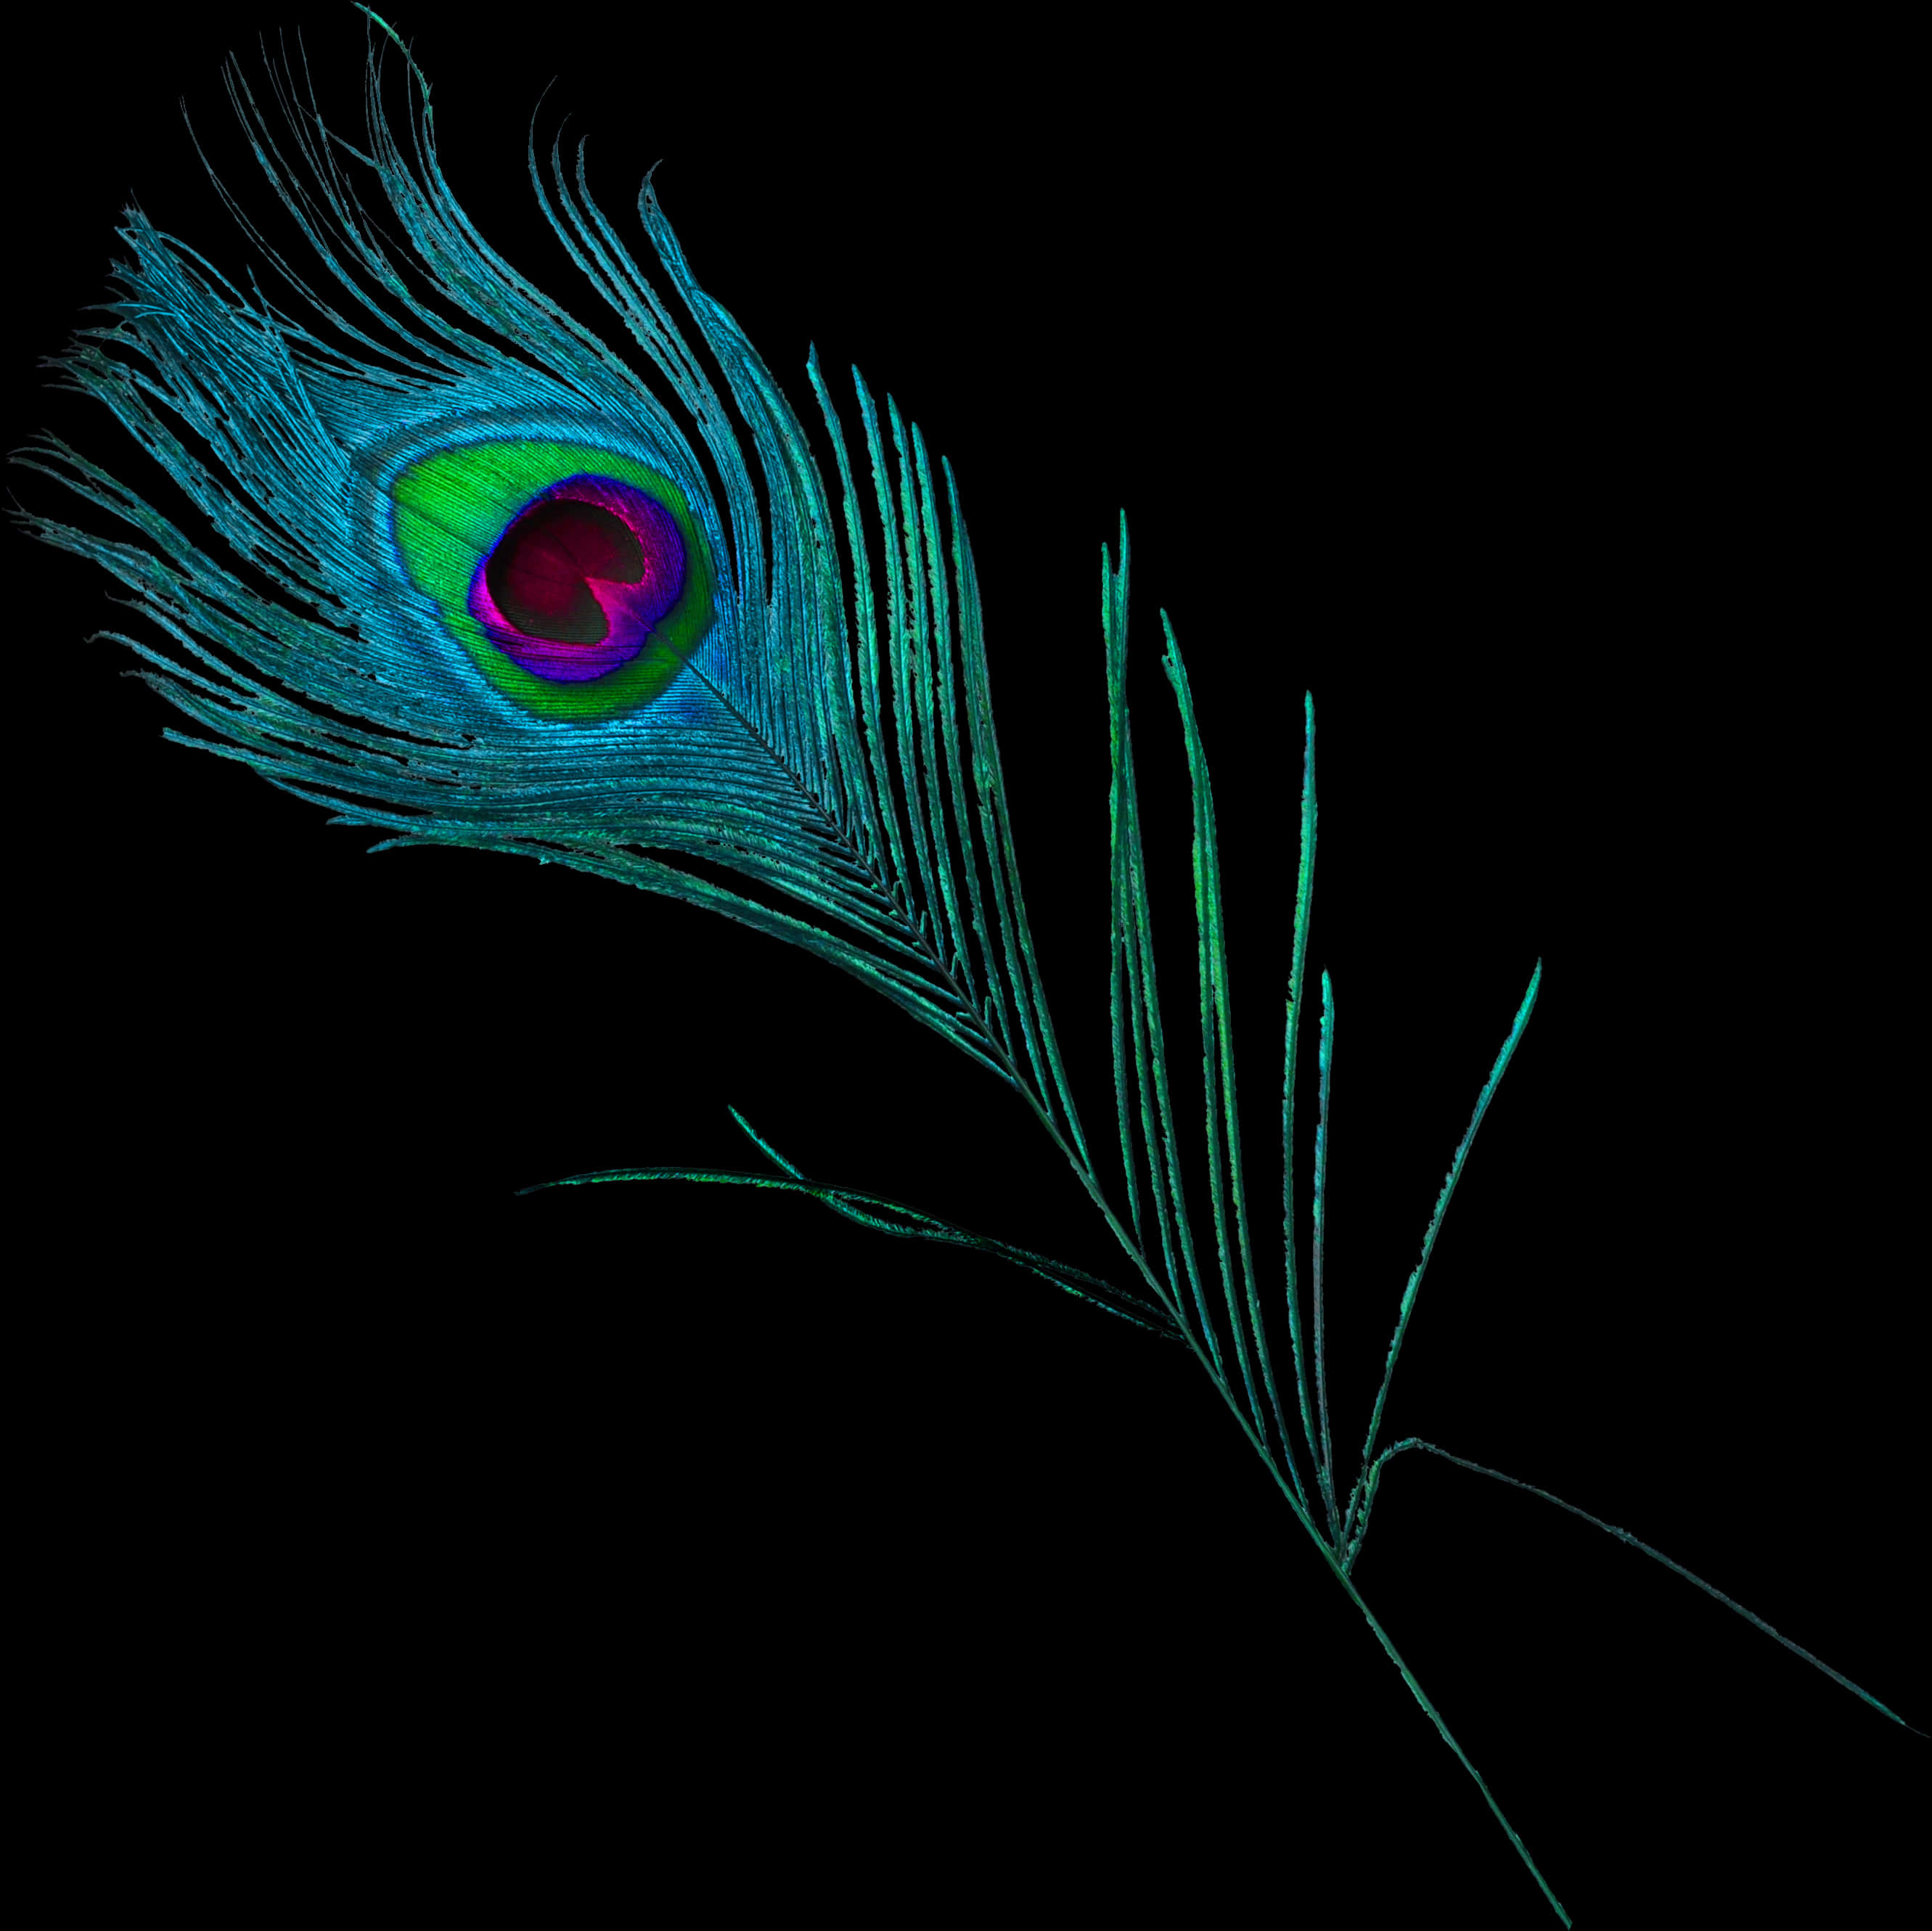 A Peacock Feather On A Black Background